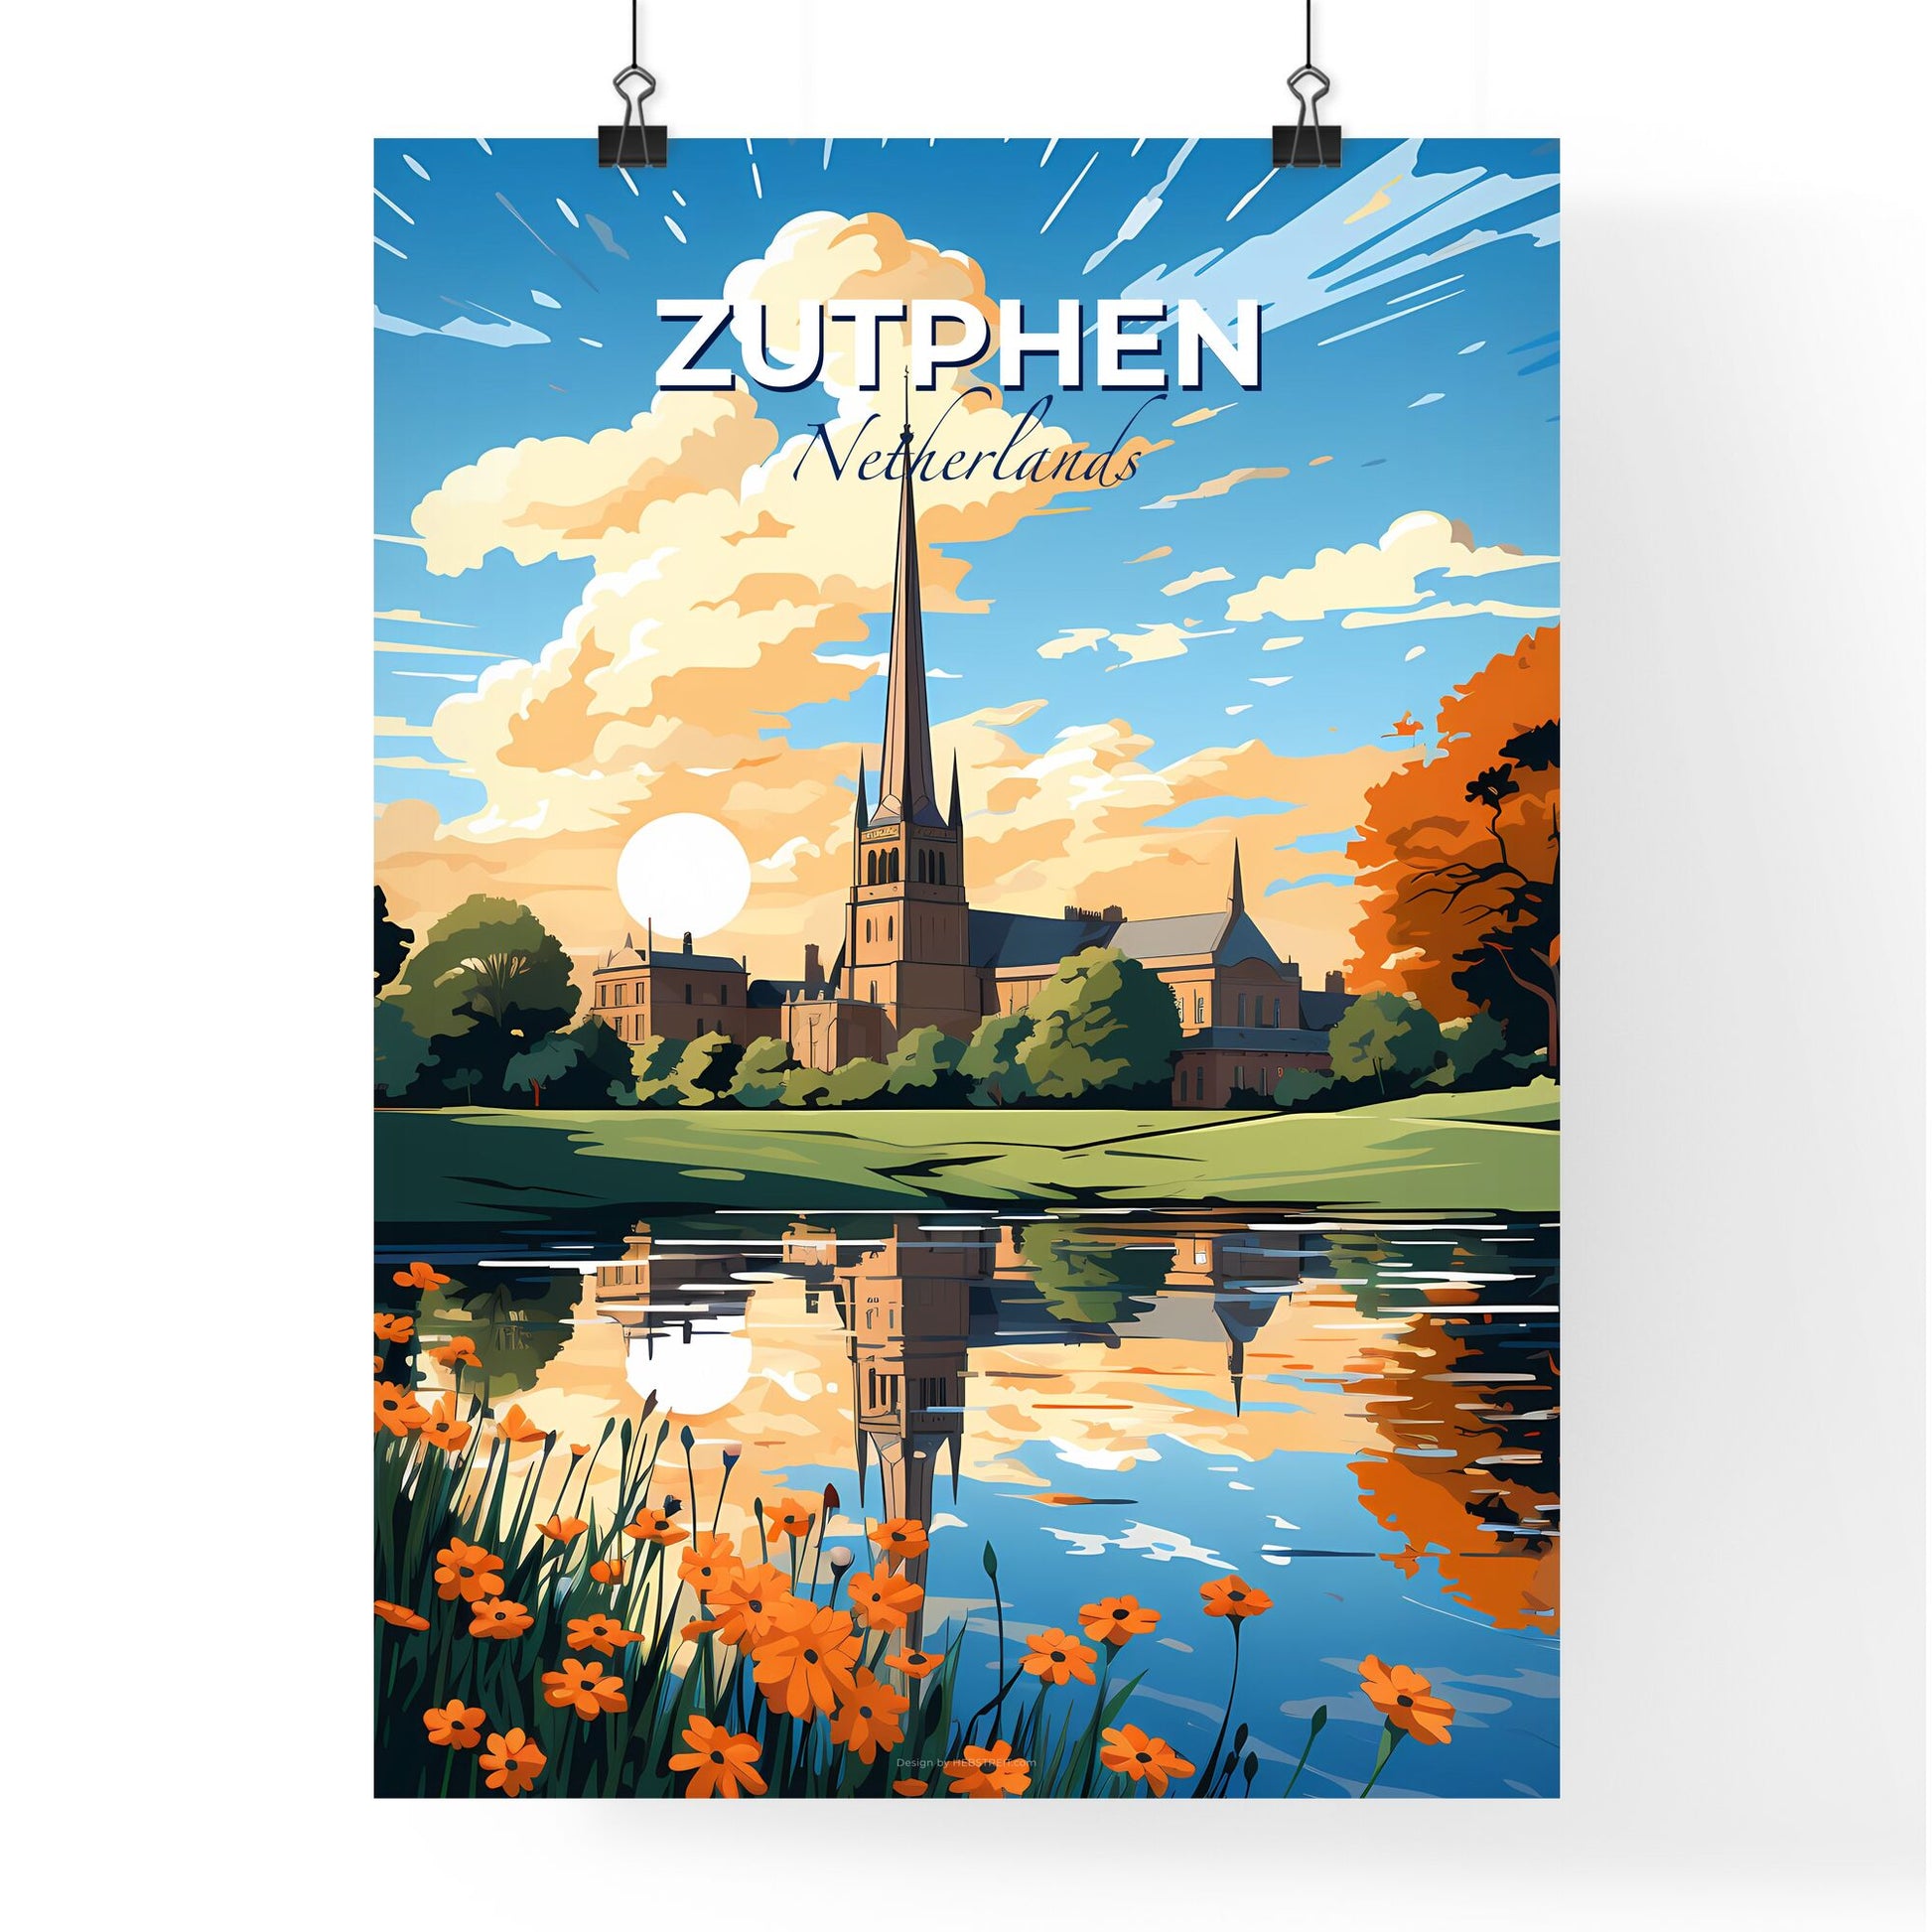 Zutphen, Netherlands, A Poster of a painting of a building with a tall spire and trees and a pond with orange flowers Default Title